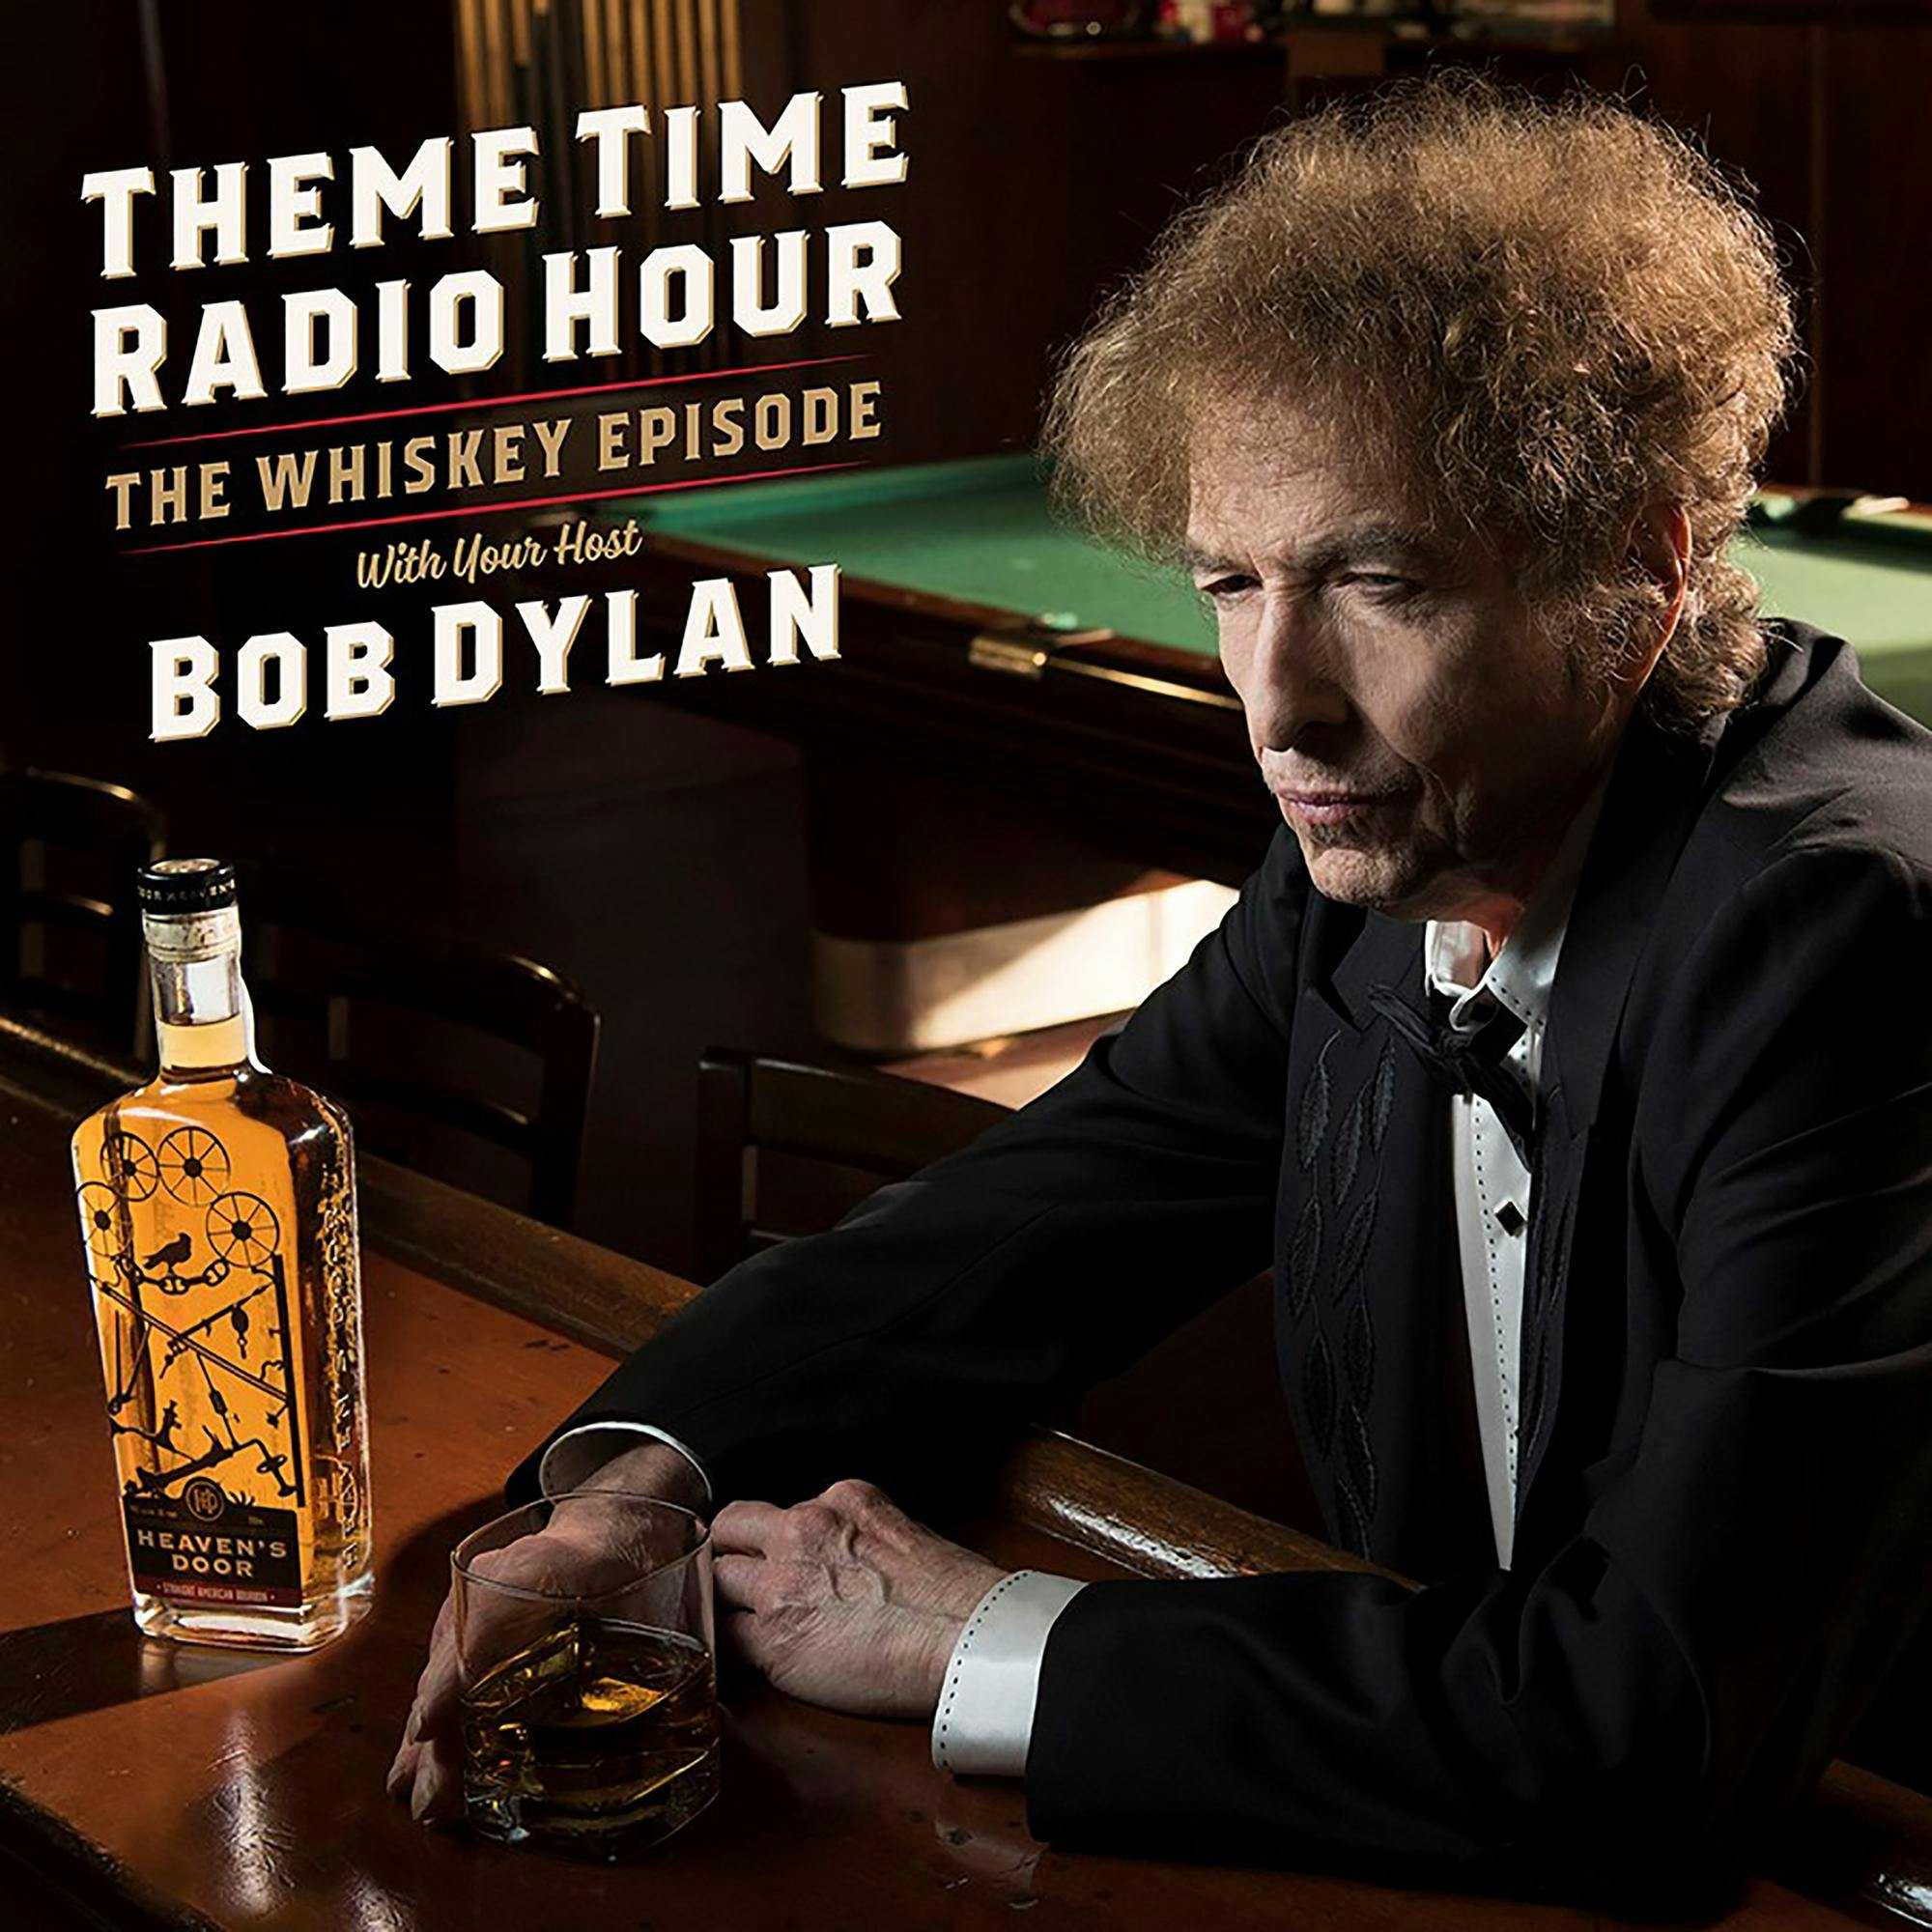 The Whiskey Episode, with your host Bob Dylan